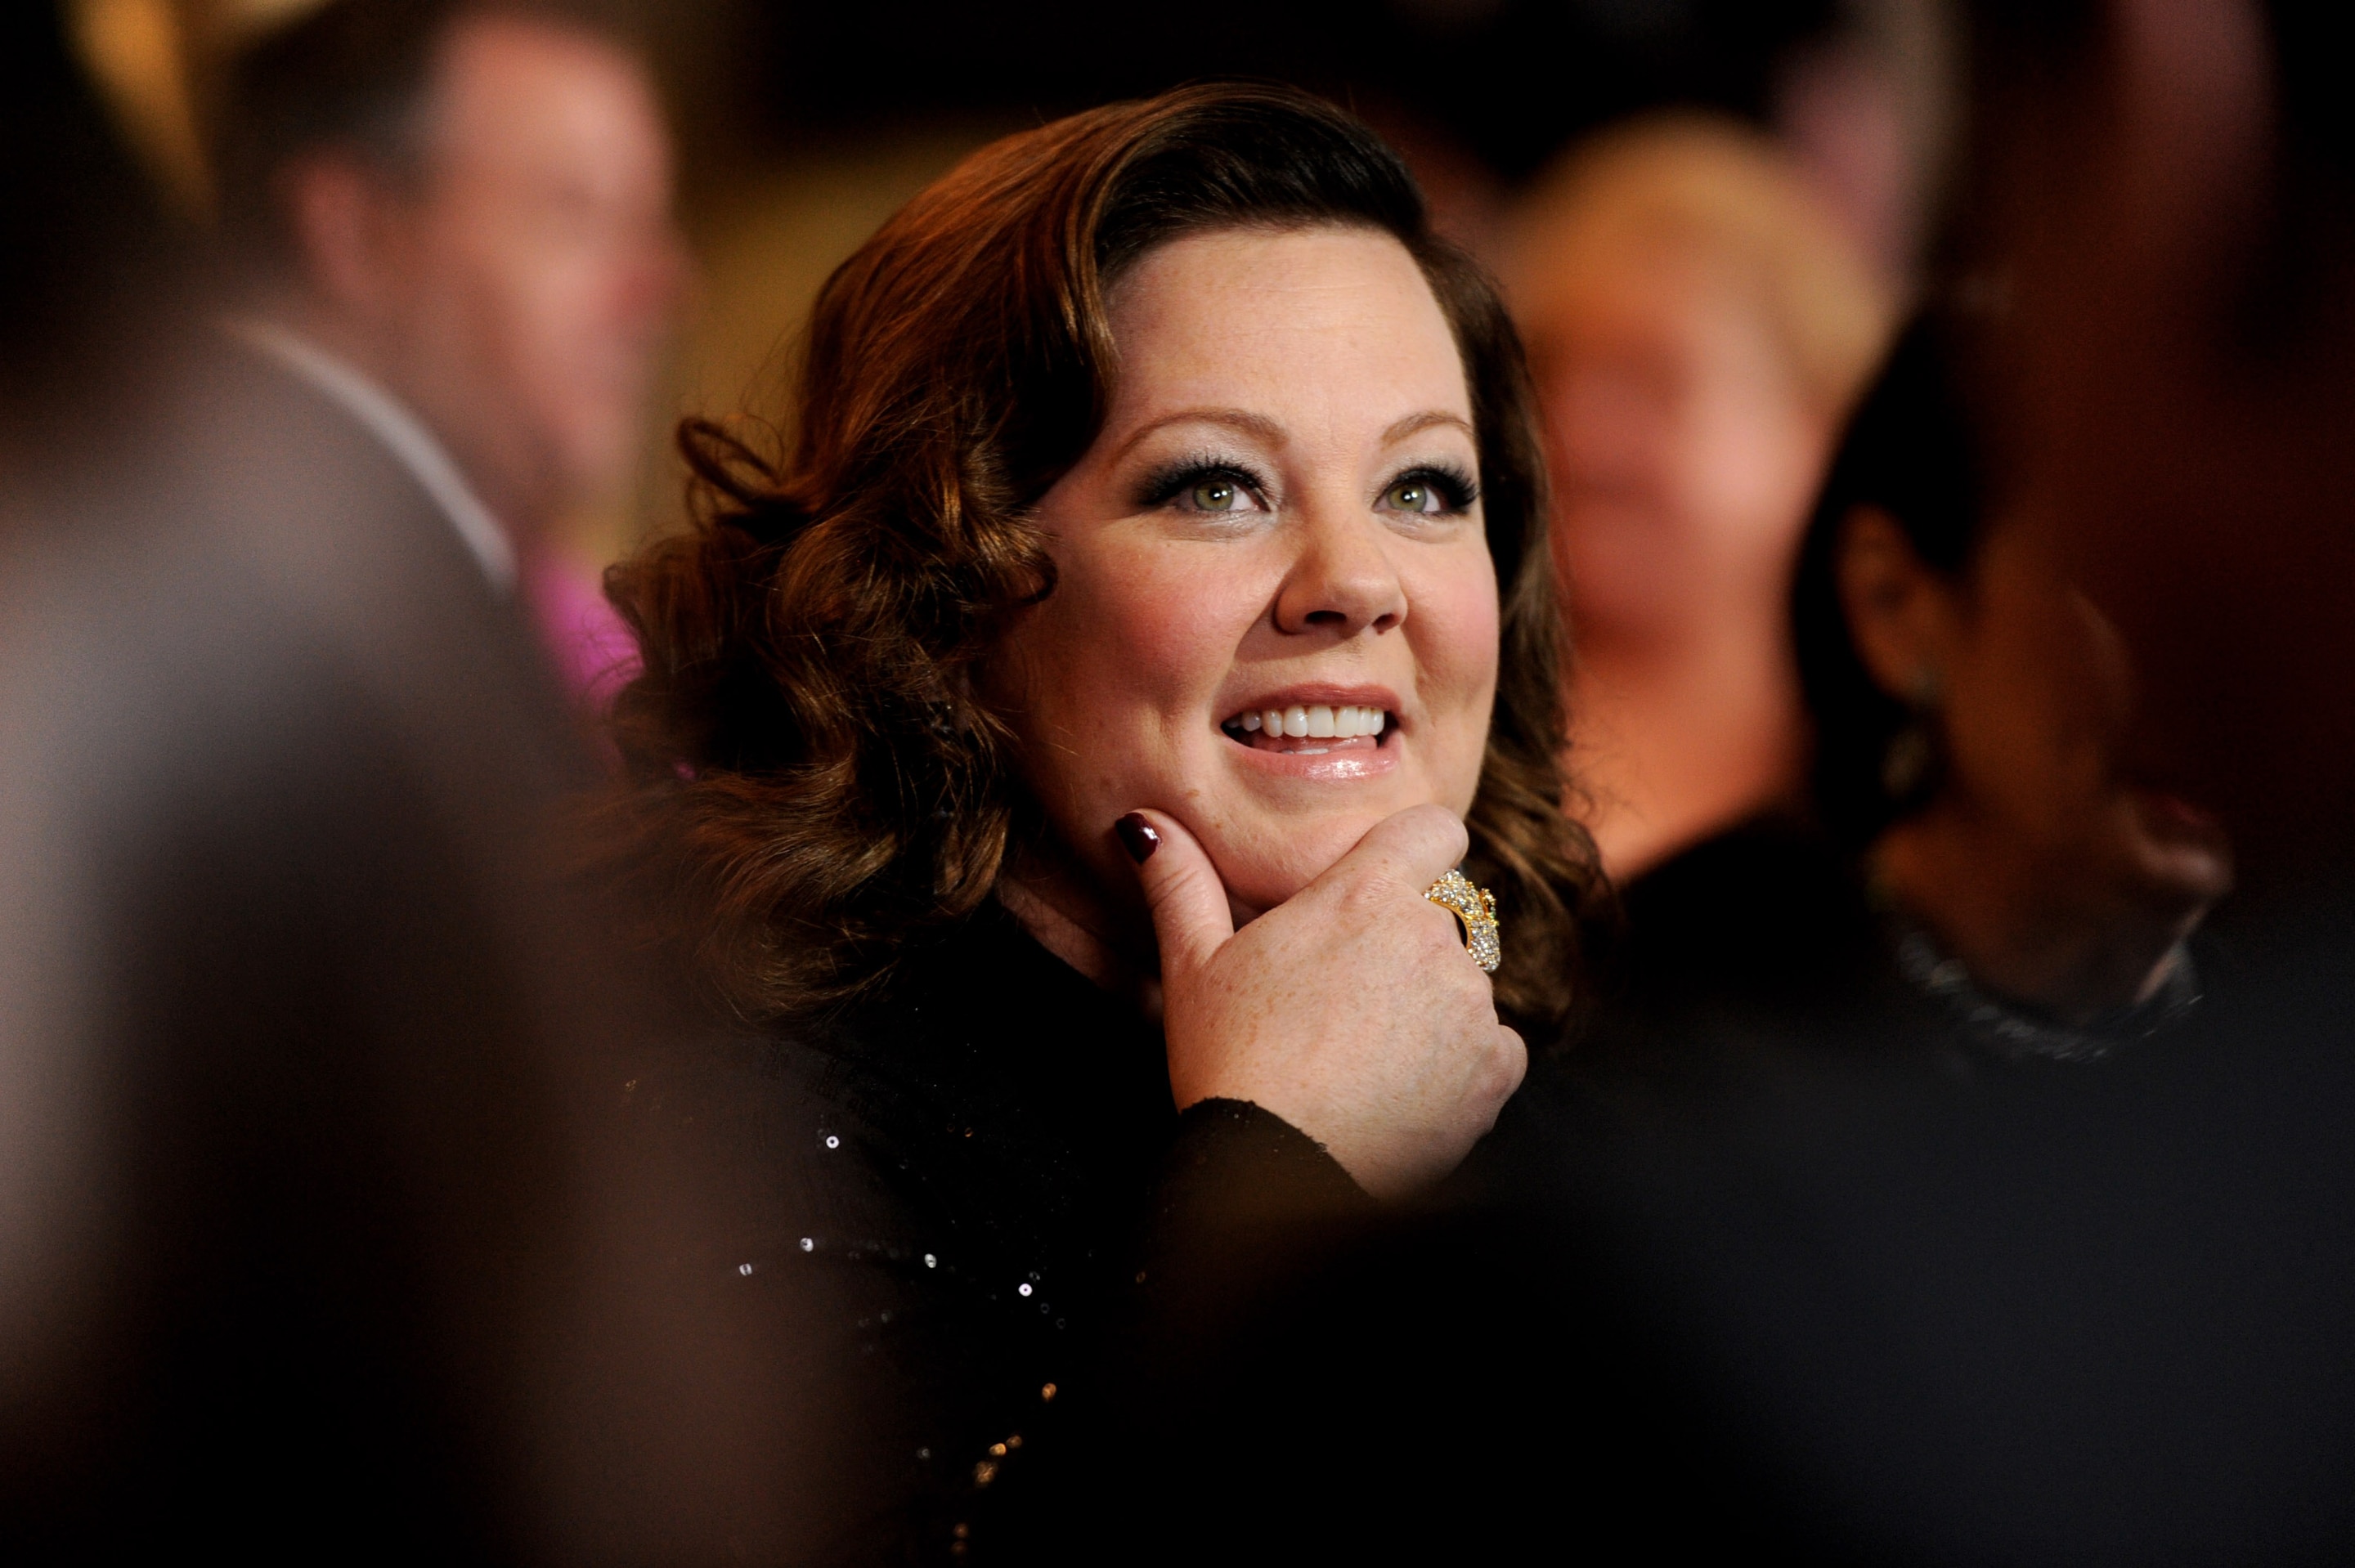 View photos from Saturday Night Live Get to Know Melissa McCarthy on NBC.co...